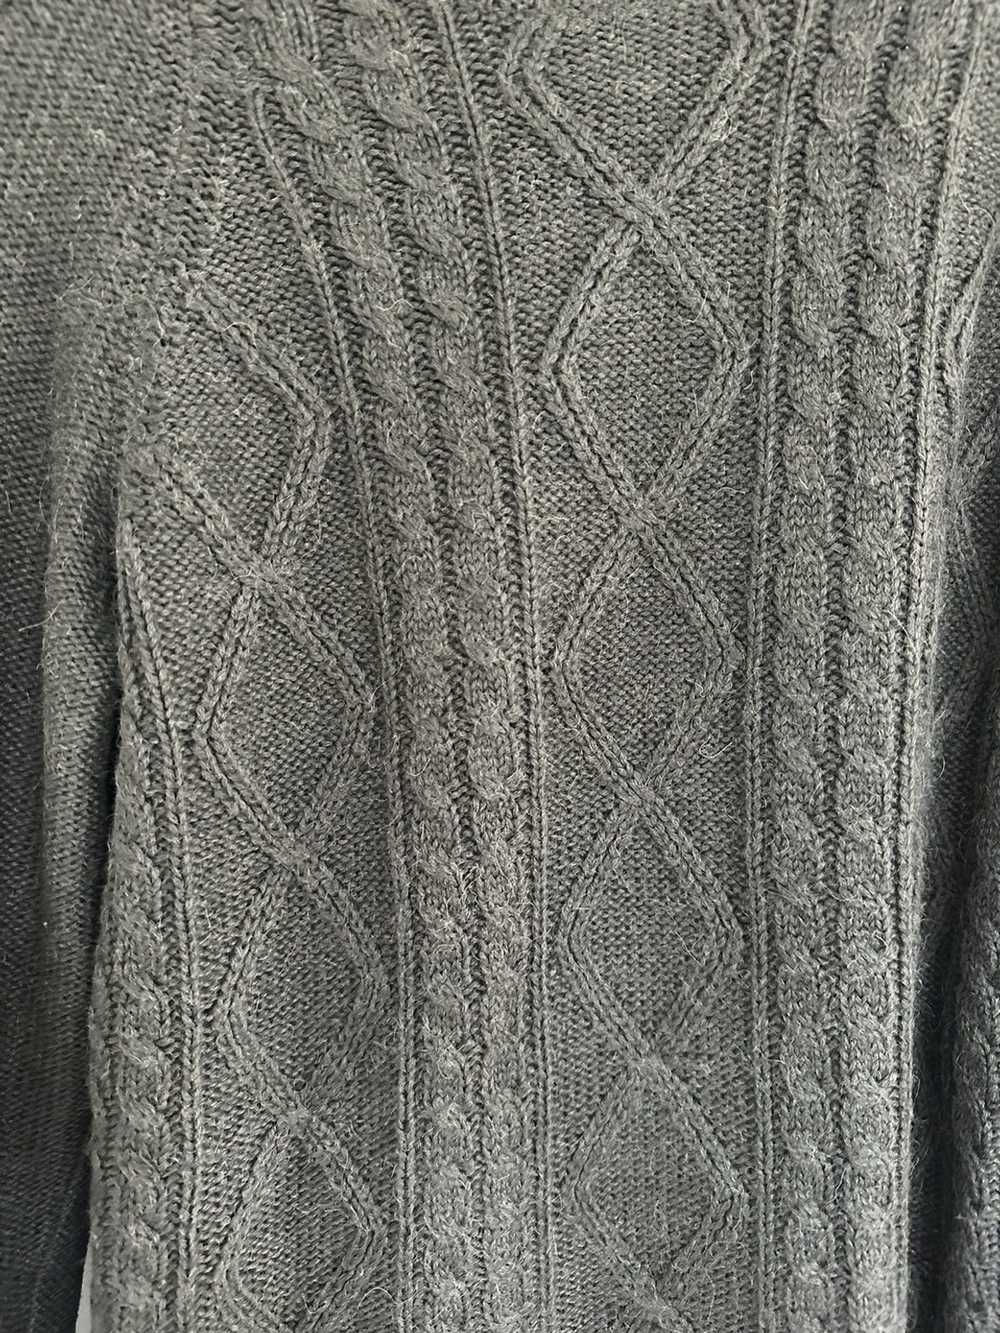 Marc By Marc Jacobs Grey cableknit Alpaca Sweater - image 4